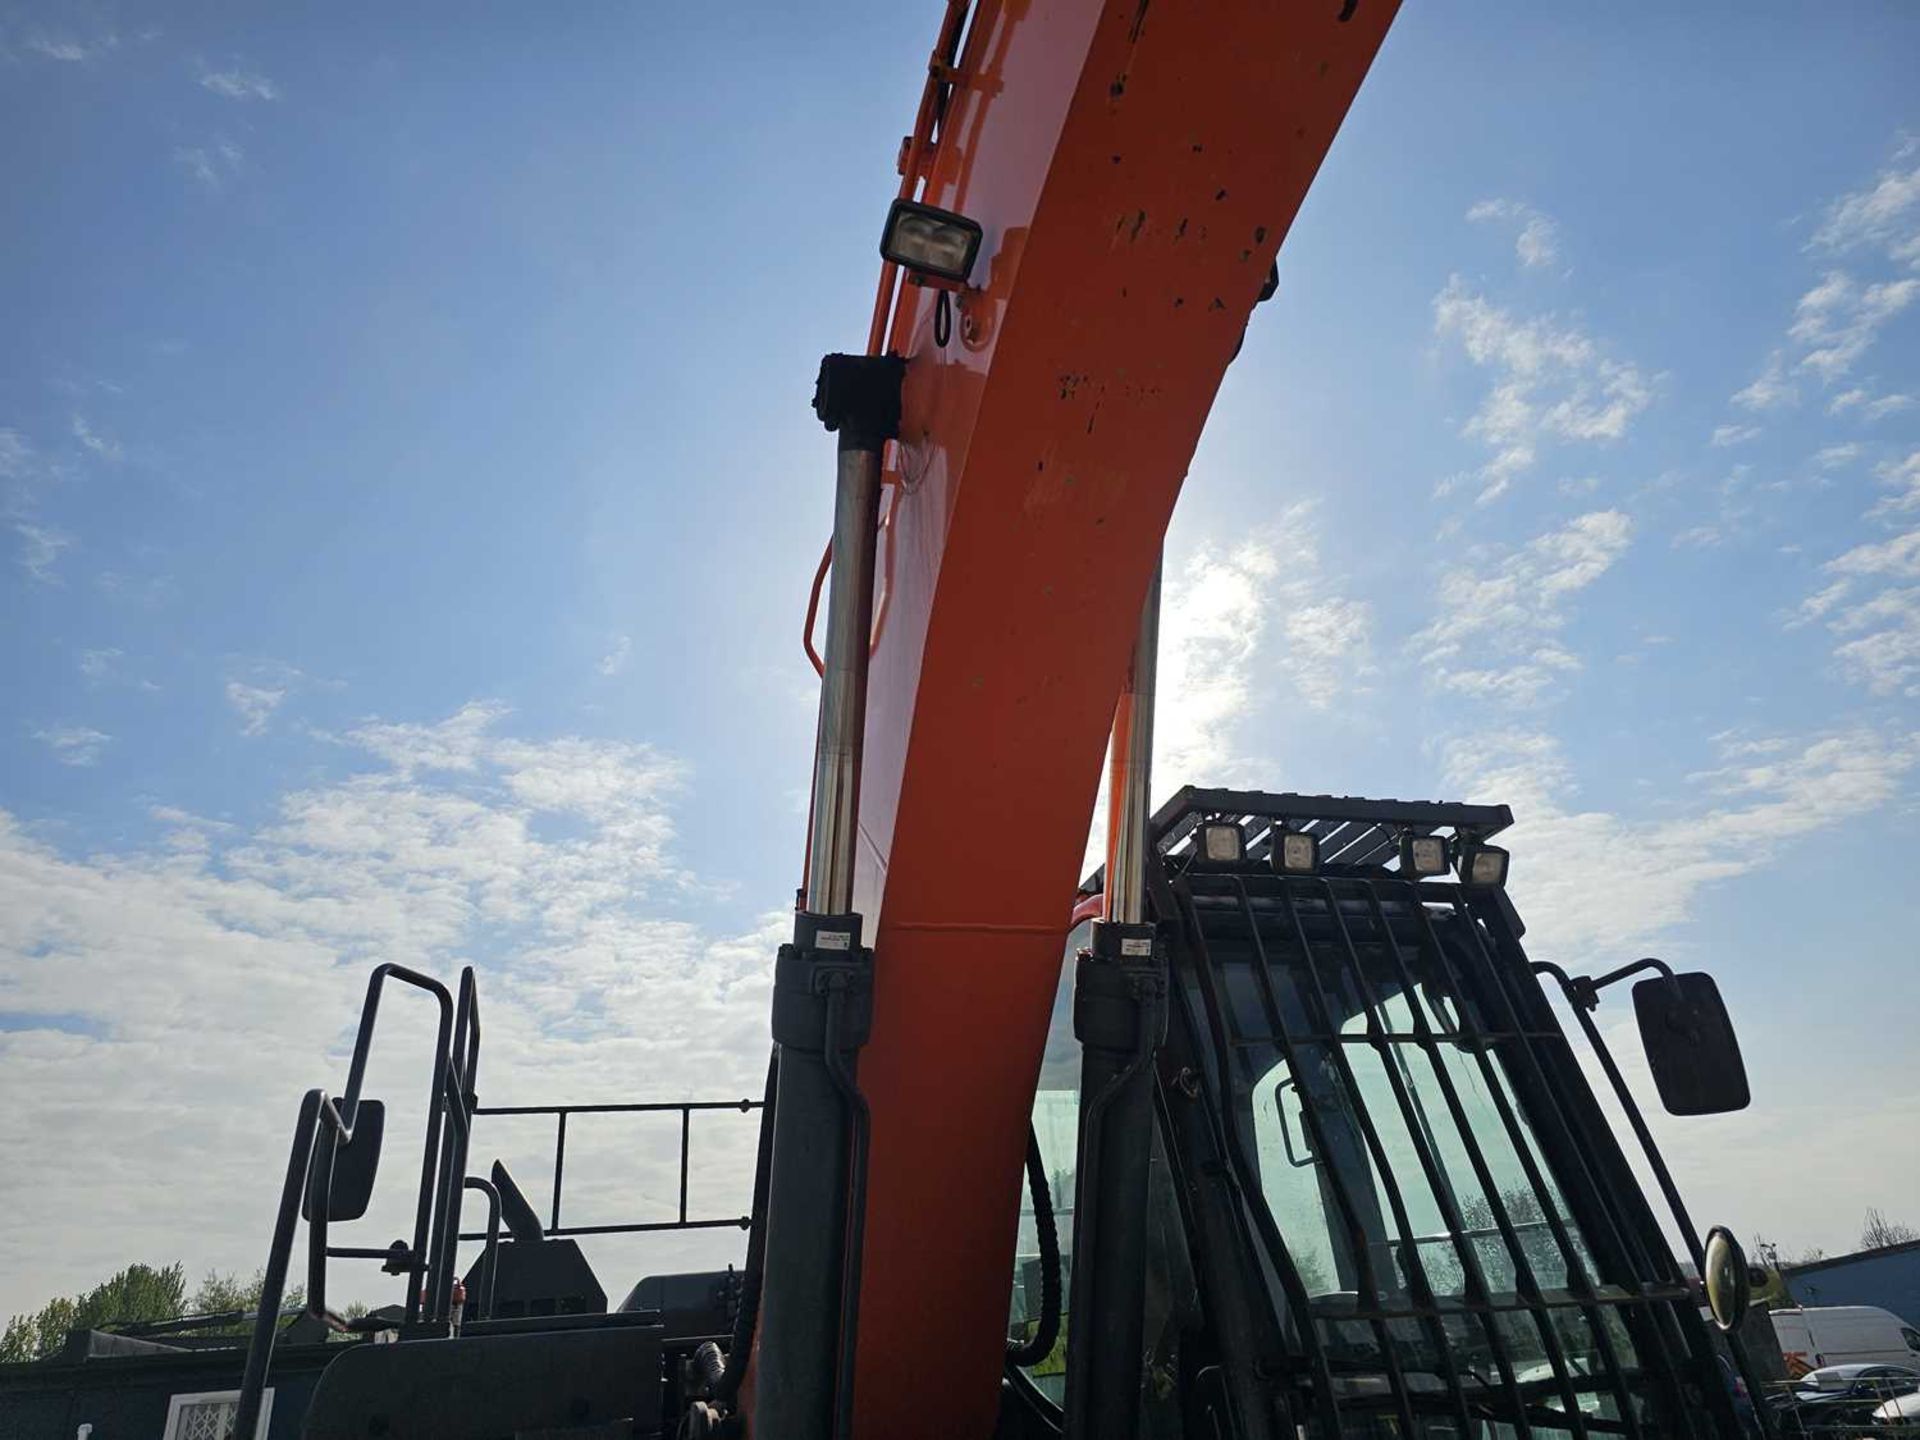 2018 Doosan DX225LC-5 800mm Pads, CV, Geith Hydraulic QH, Piped, Aux. Piping, Demo Cage, Reverse Cam - Image 12 of 34